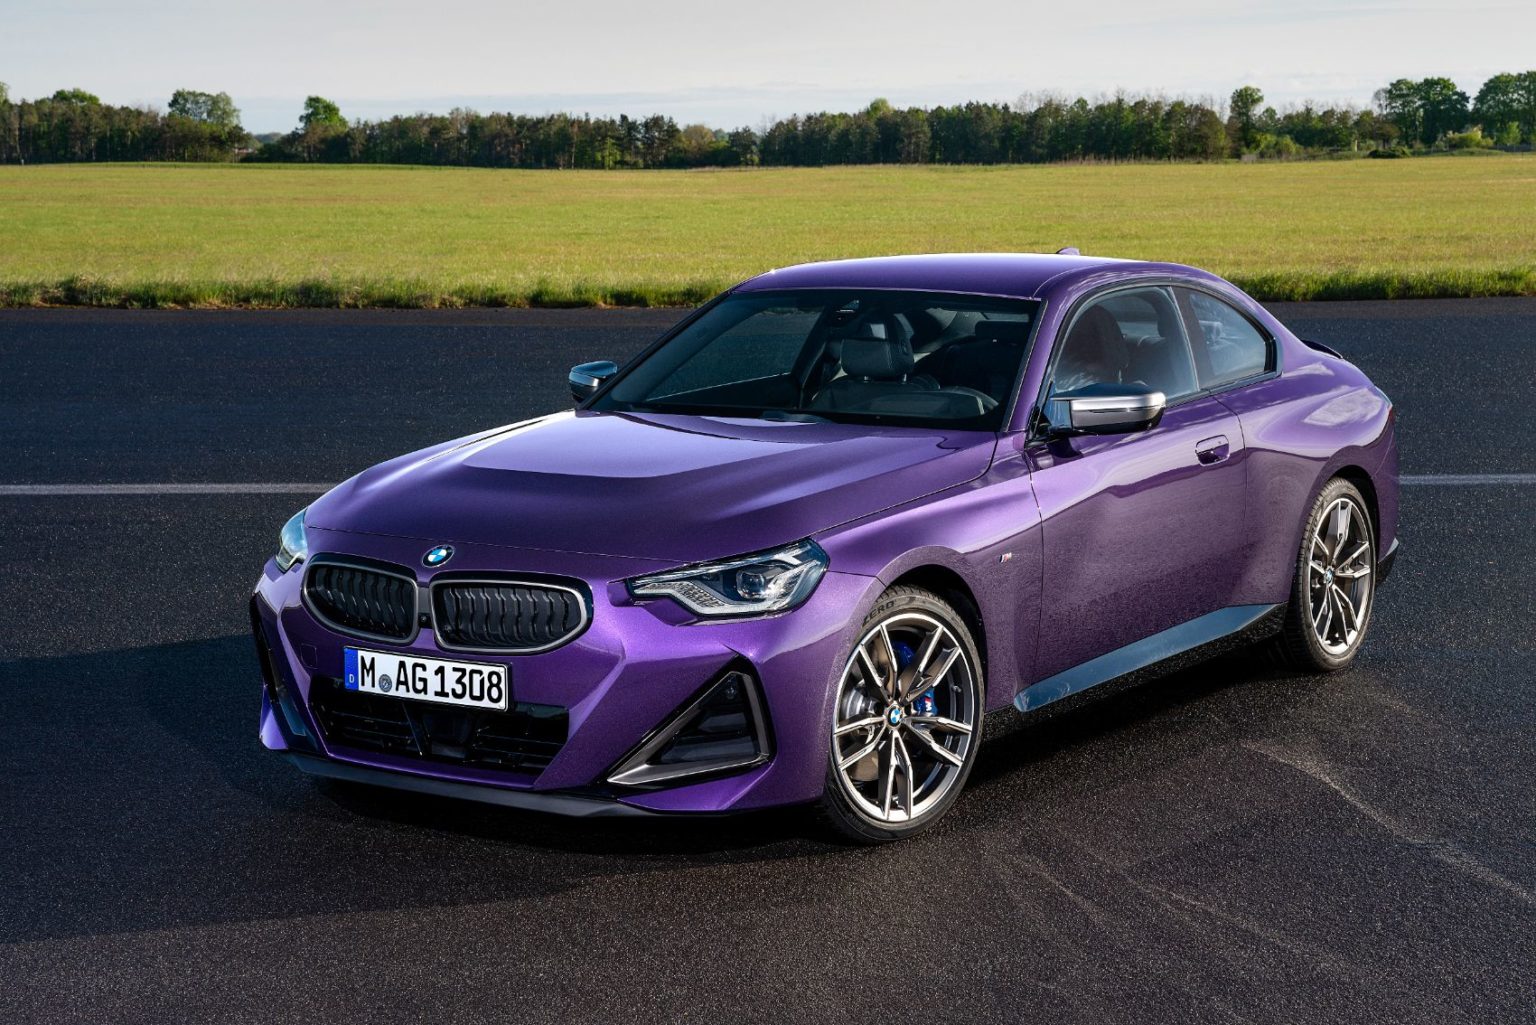 2022 BMW 2 Series Coupe: More Car But Same Great Rear-Wheel Drive Thrills